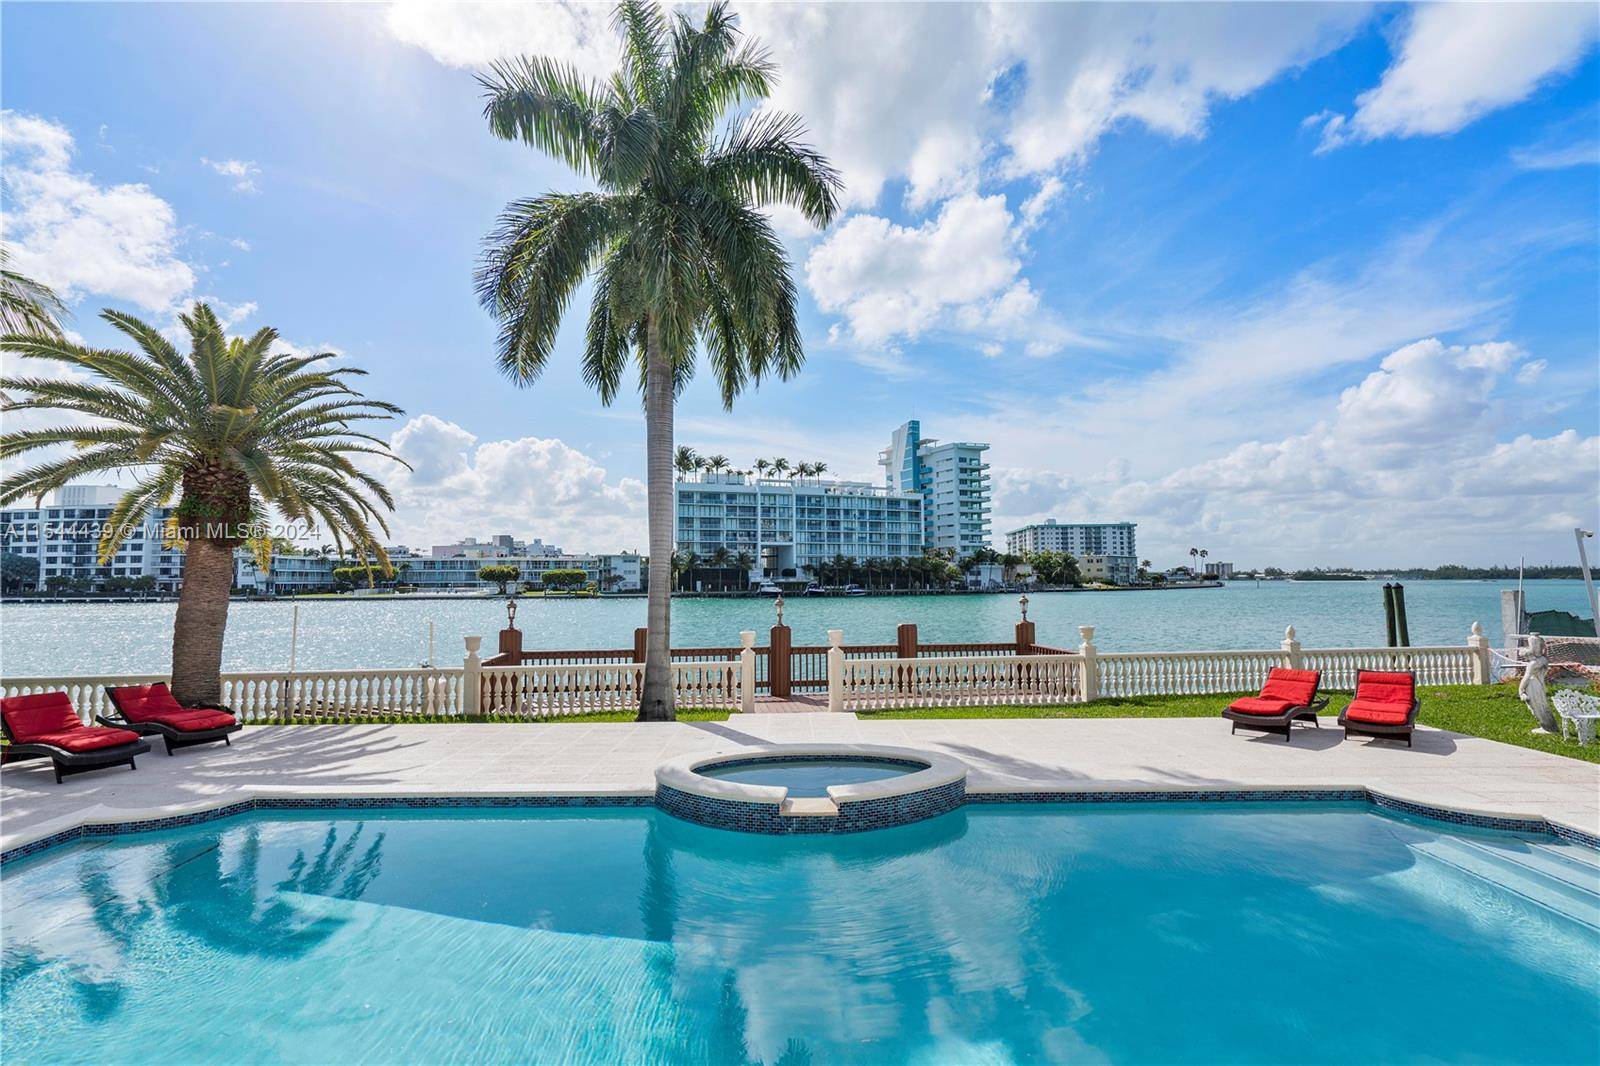 Nestled along the prestigious Bal Harbour Village, this exceptional residence epitomizes waterfront elegance in gated Bal Harbour with 24 hours security.